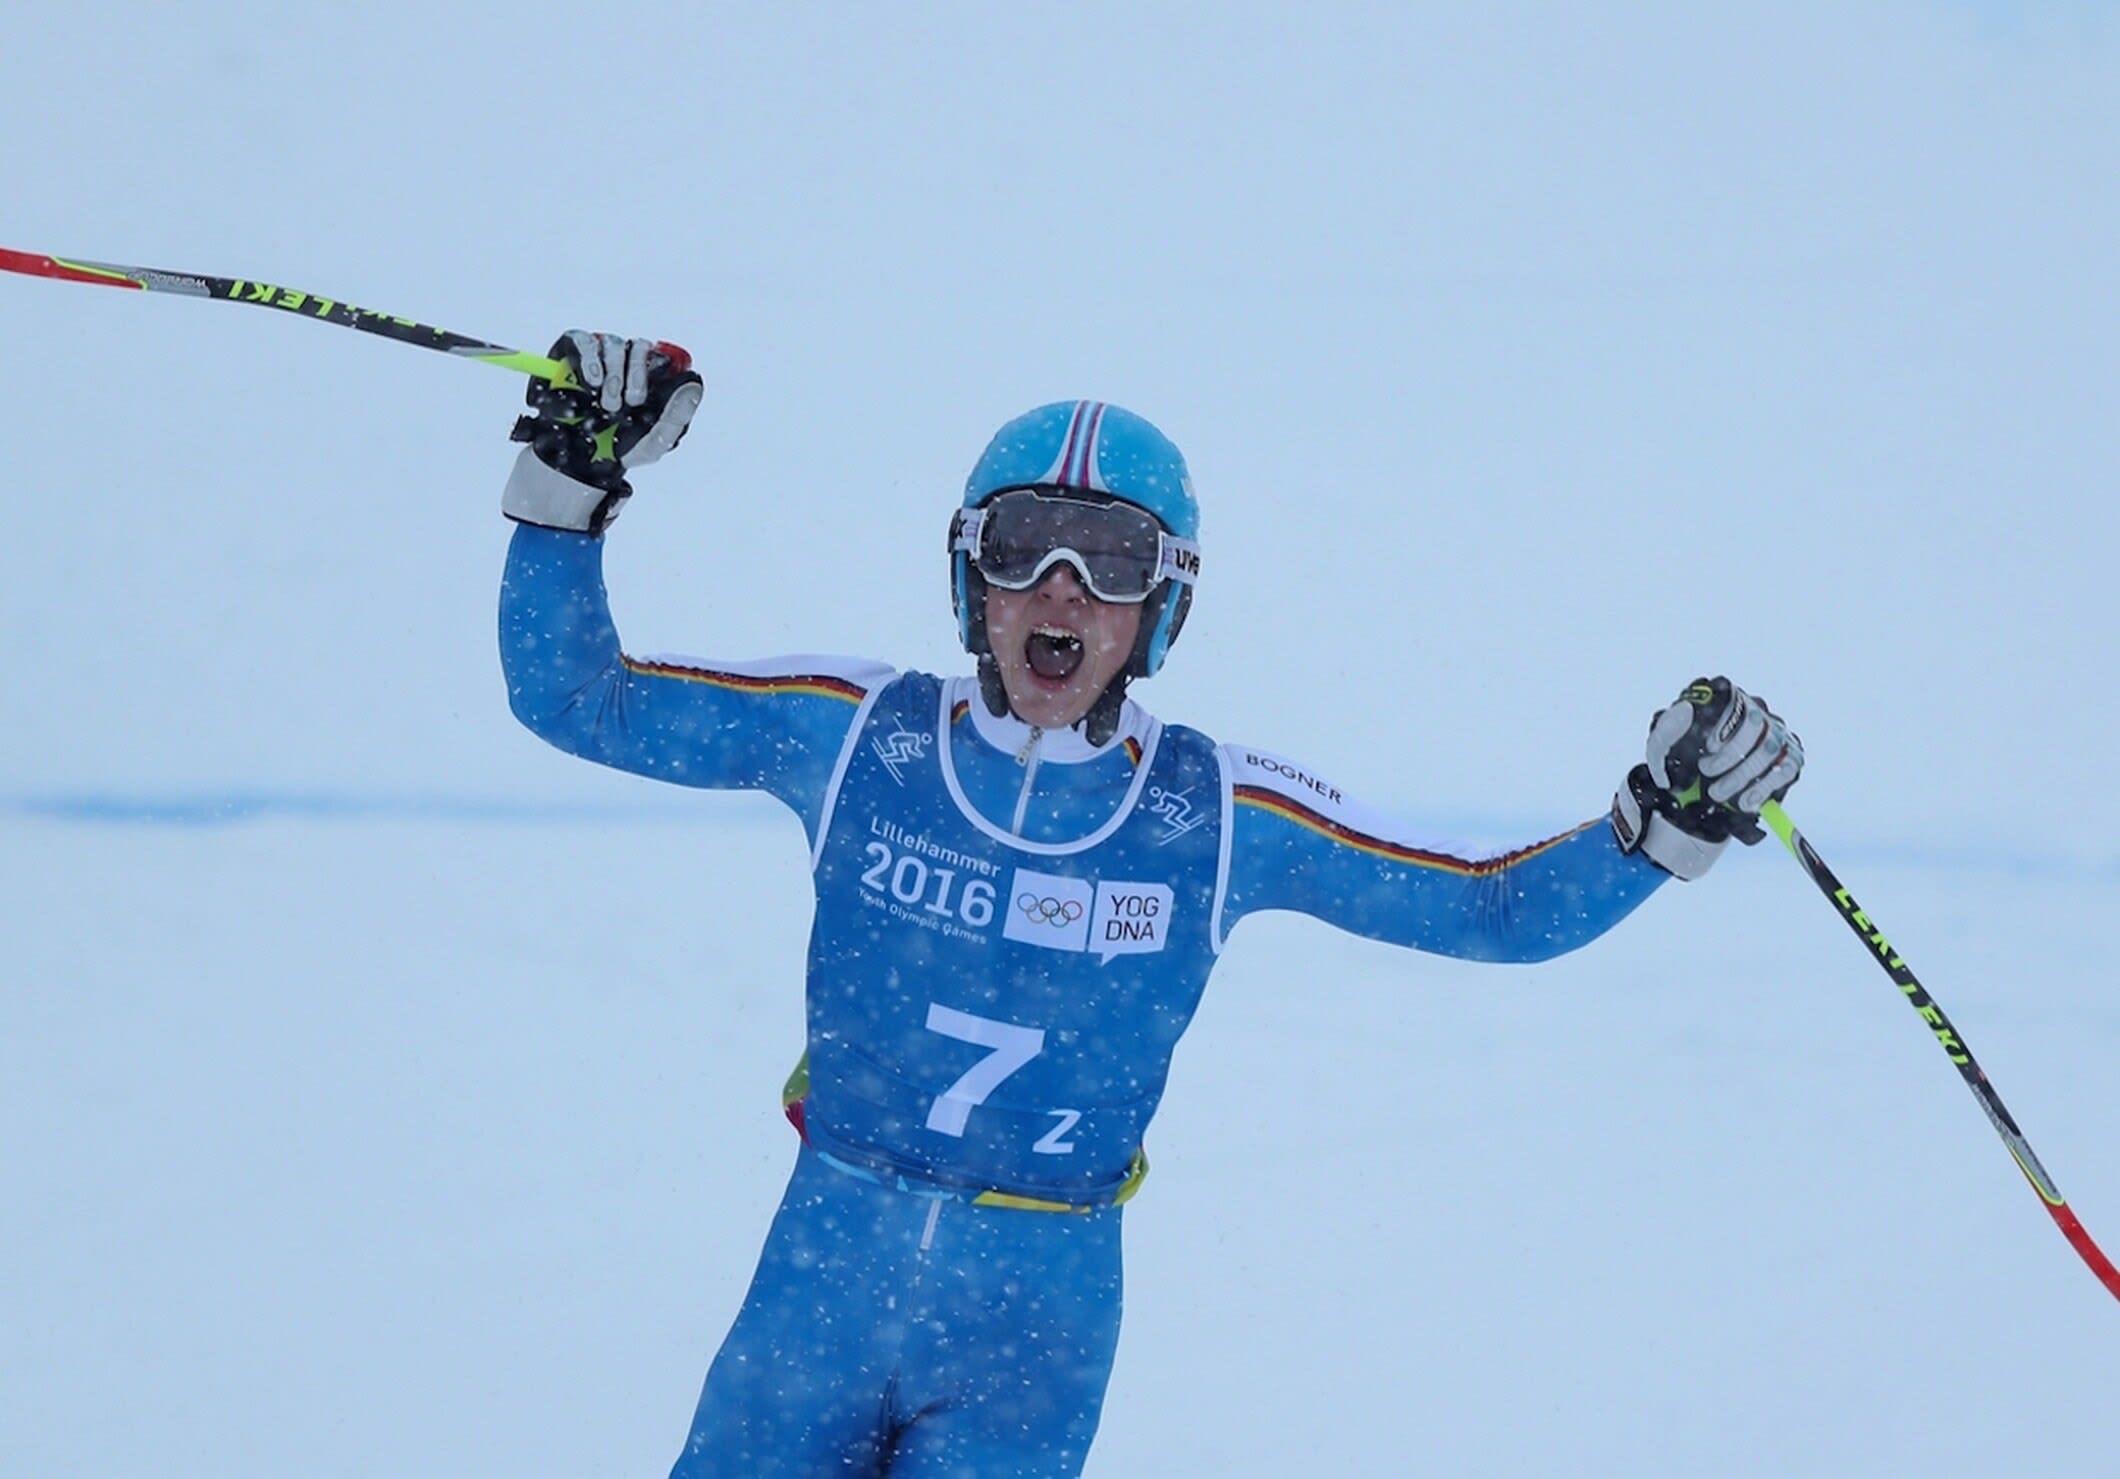 Germany's Jonas Stockinger celebrates after a run in the parallel mixed team finals. Photo: YIS / IOC Simon Bruty